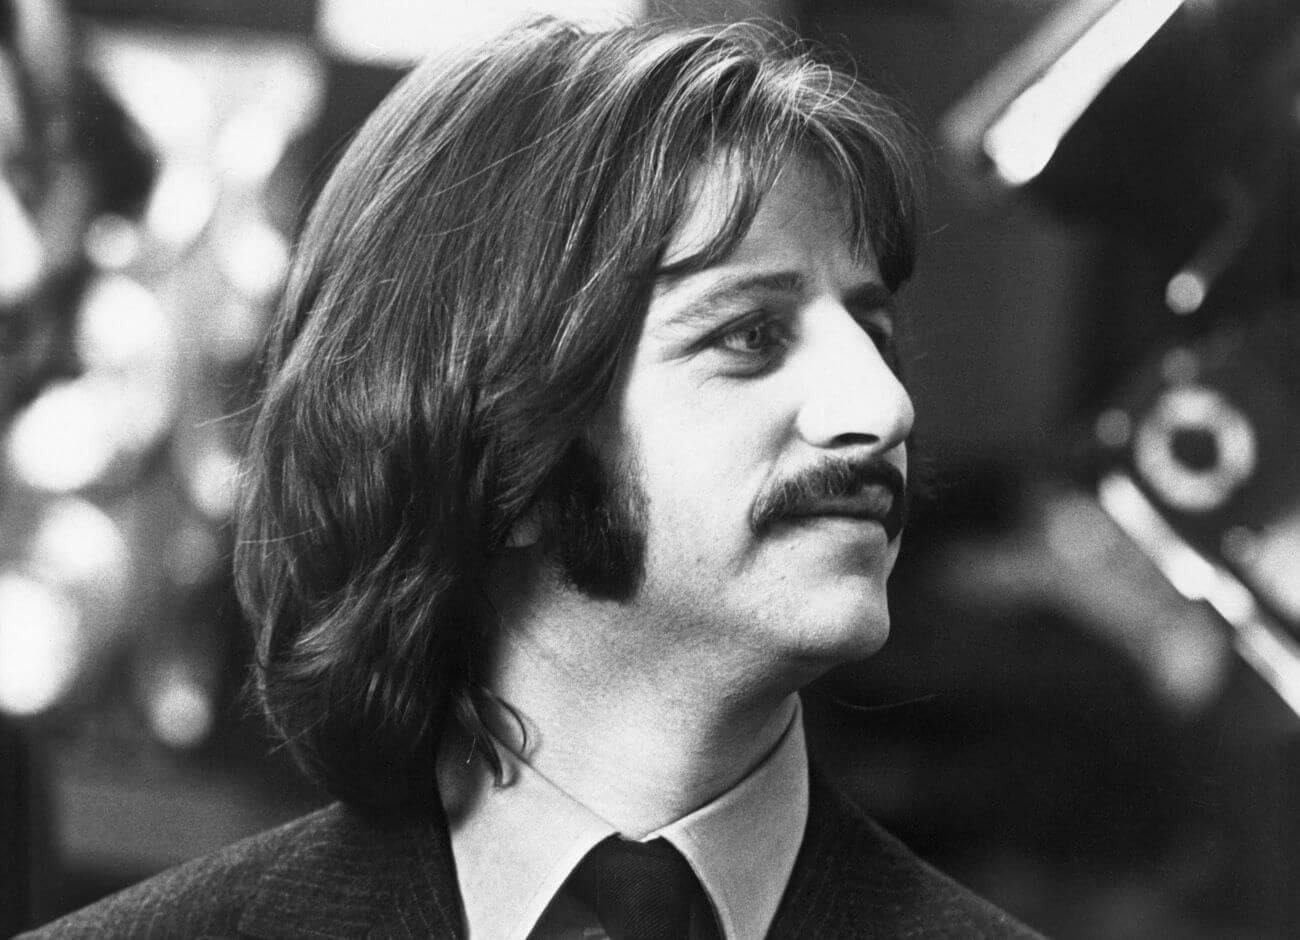 A black and white picture of Ringo Starr wearing a suit and looking to his left.